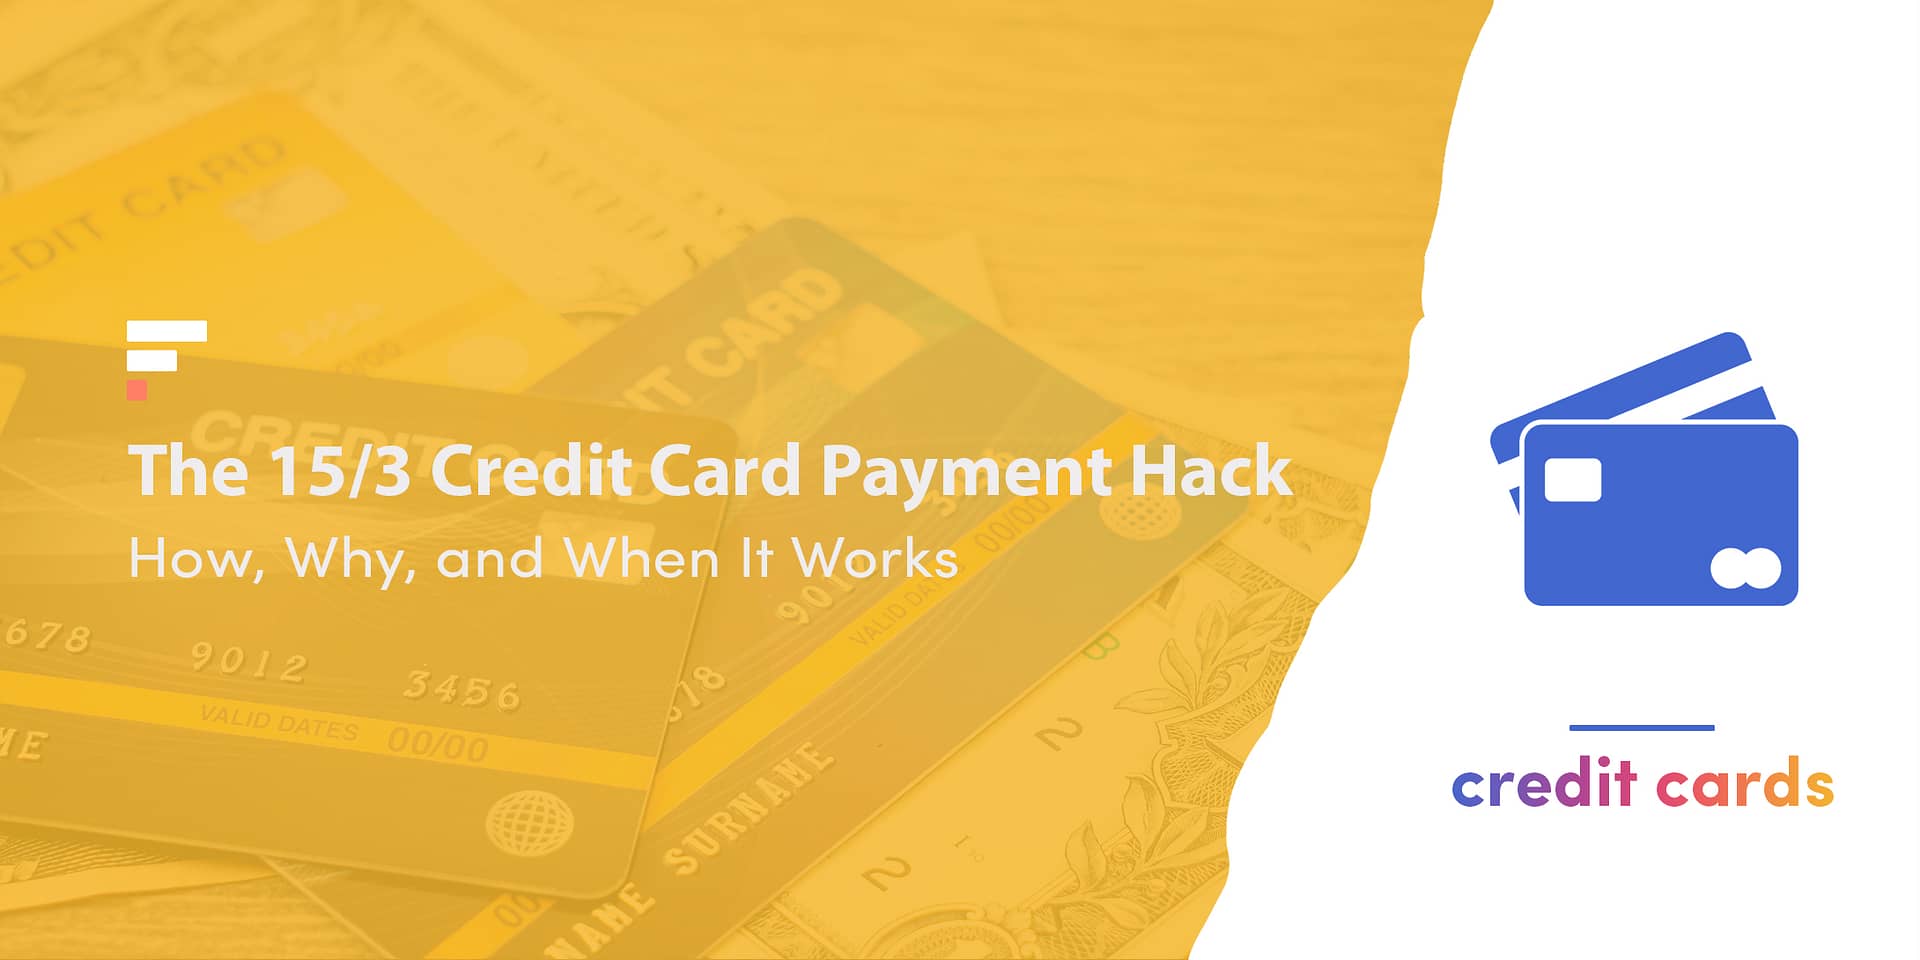 The 15/3 Credit Card Payment Hack: How, Why, and When It Works